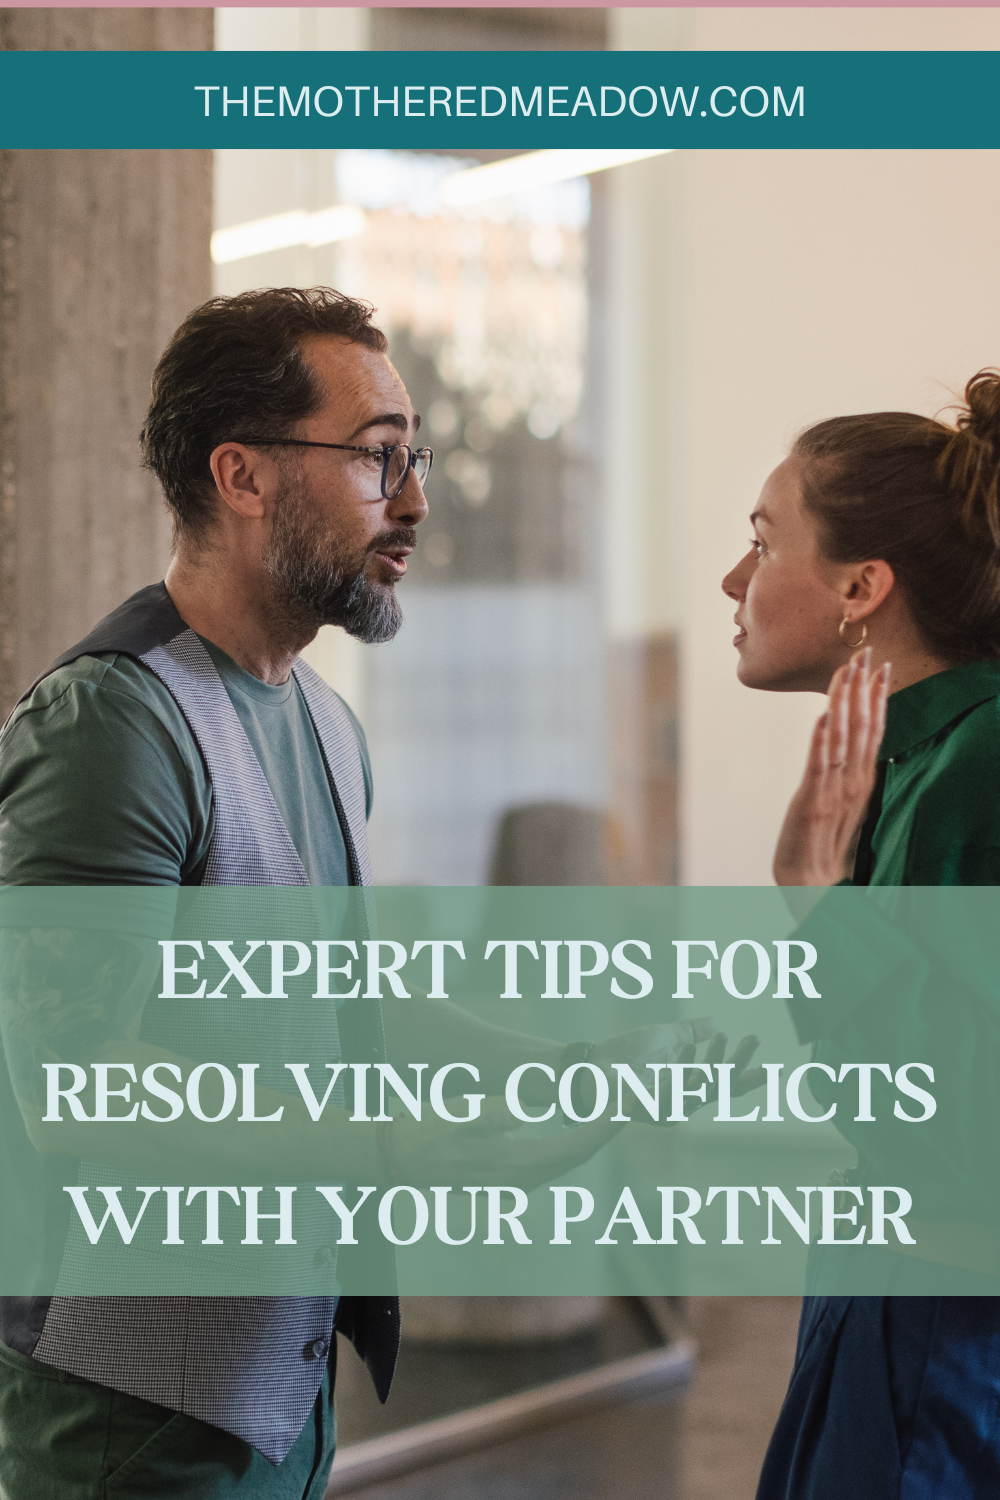 a couple working on resolving conflicts through discussion or argument